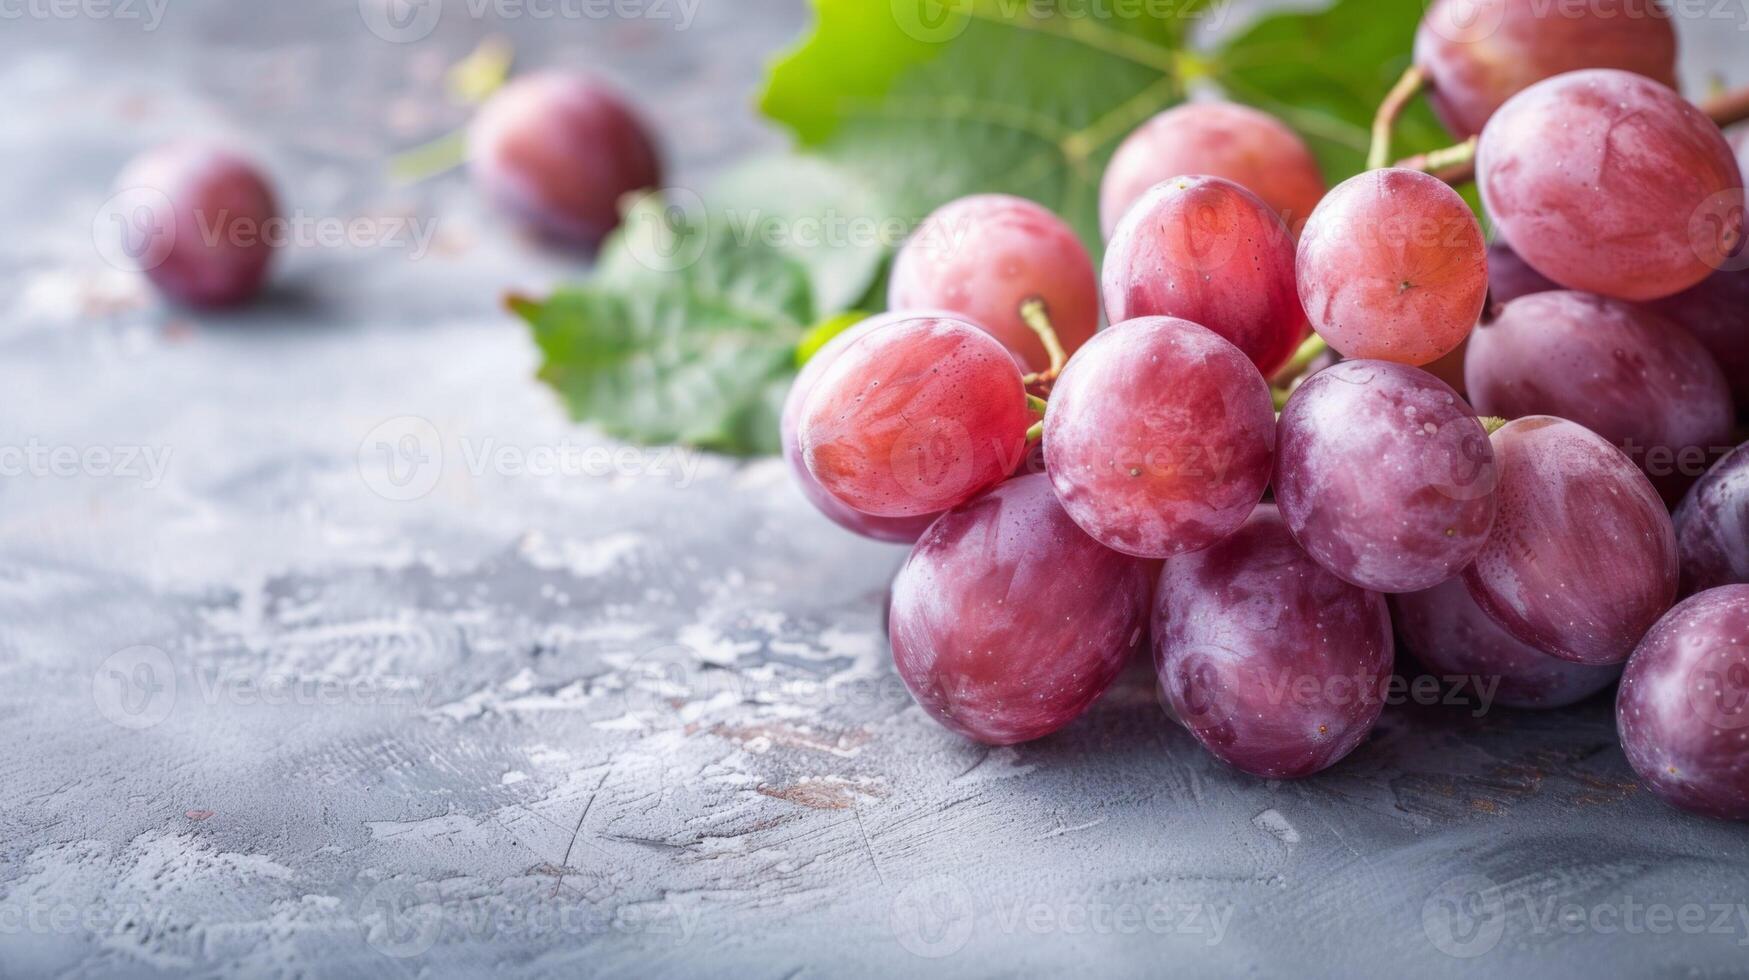 Close-up of fresh juicy purple grapes with organic vine leaves on a textured background photo